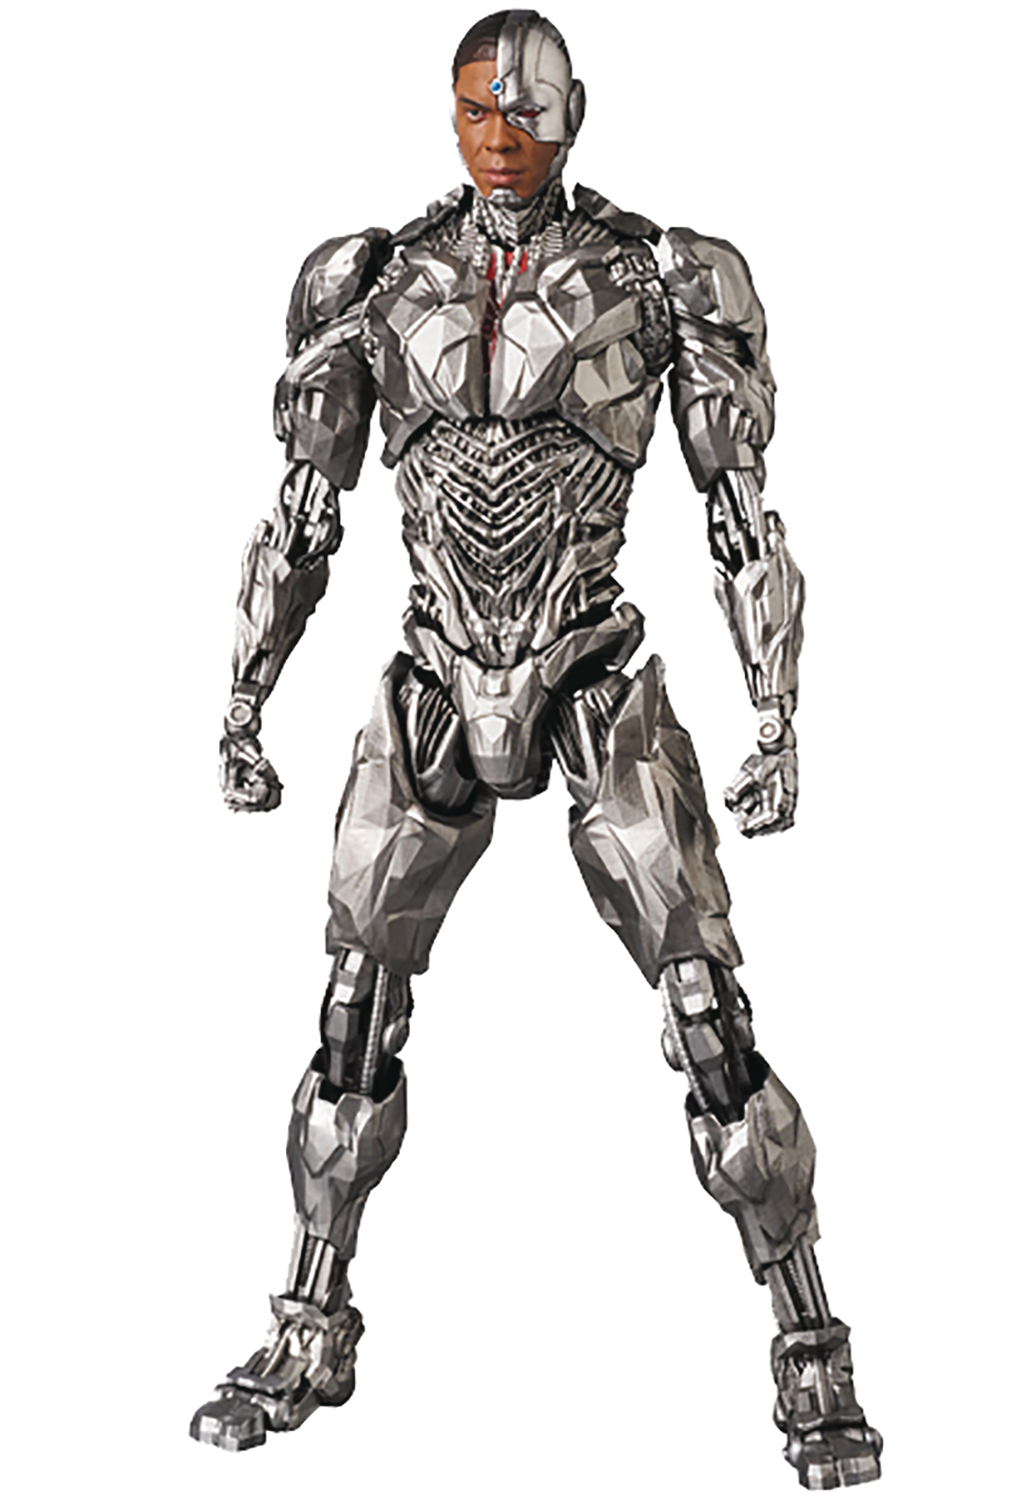 Justice League: Cyborg [MAFEX 6" Action Figure] 